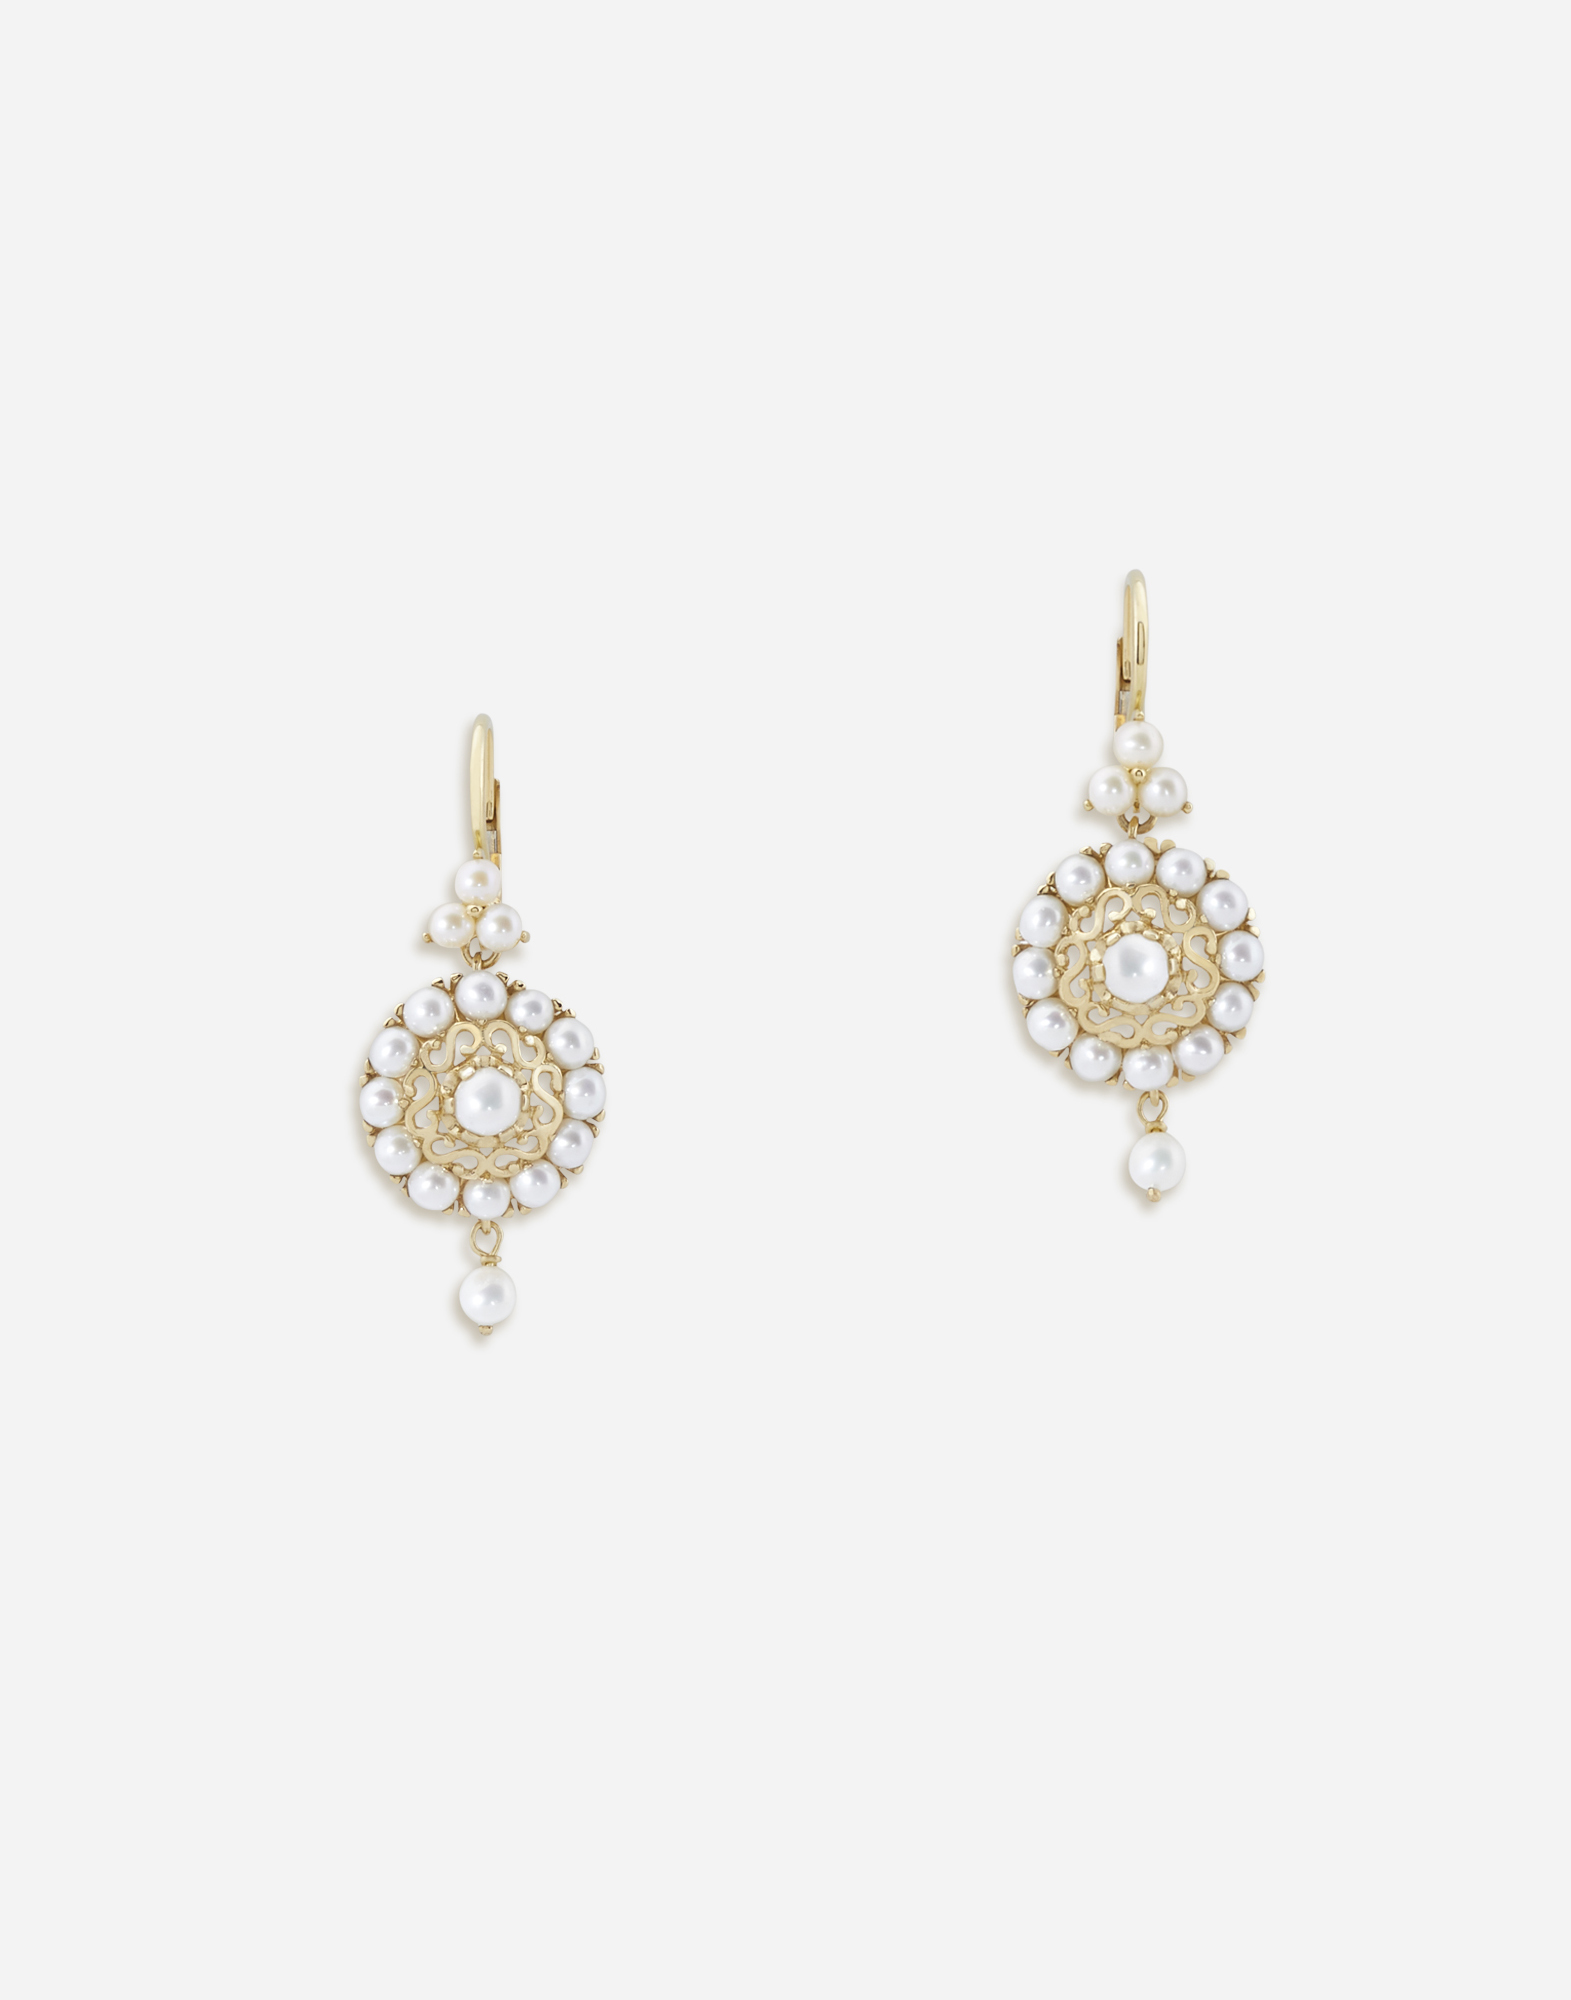 Dolce & Gabbana Romance Earrings In Yellow Gold With Pearls